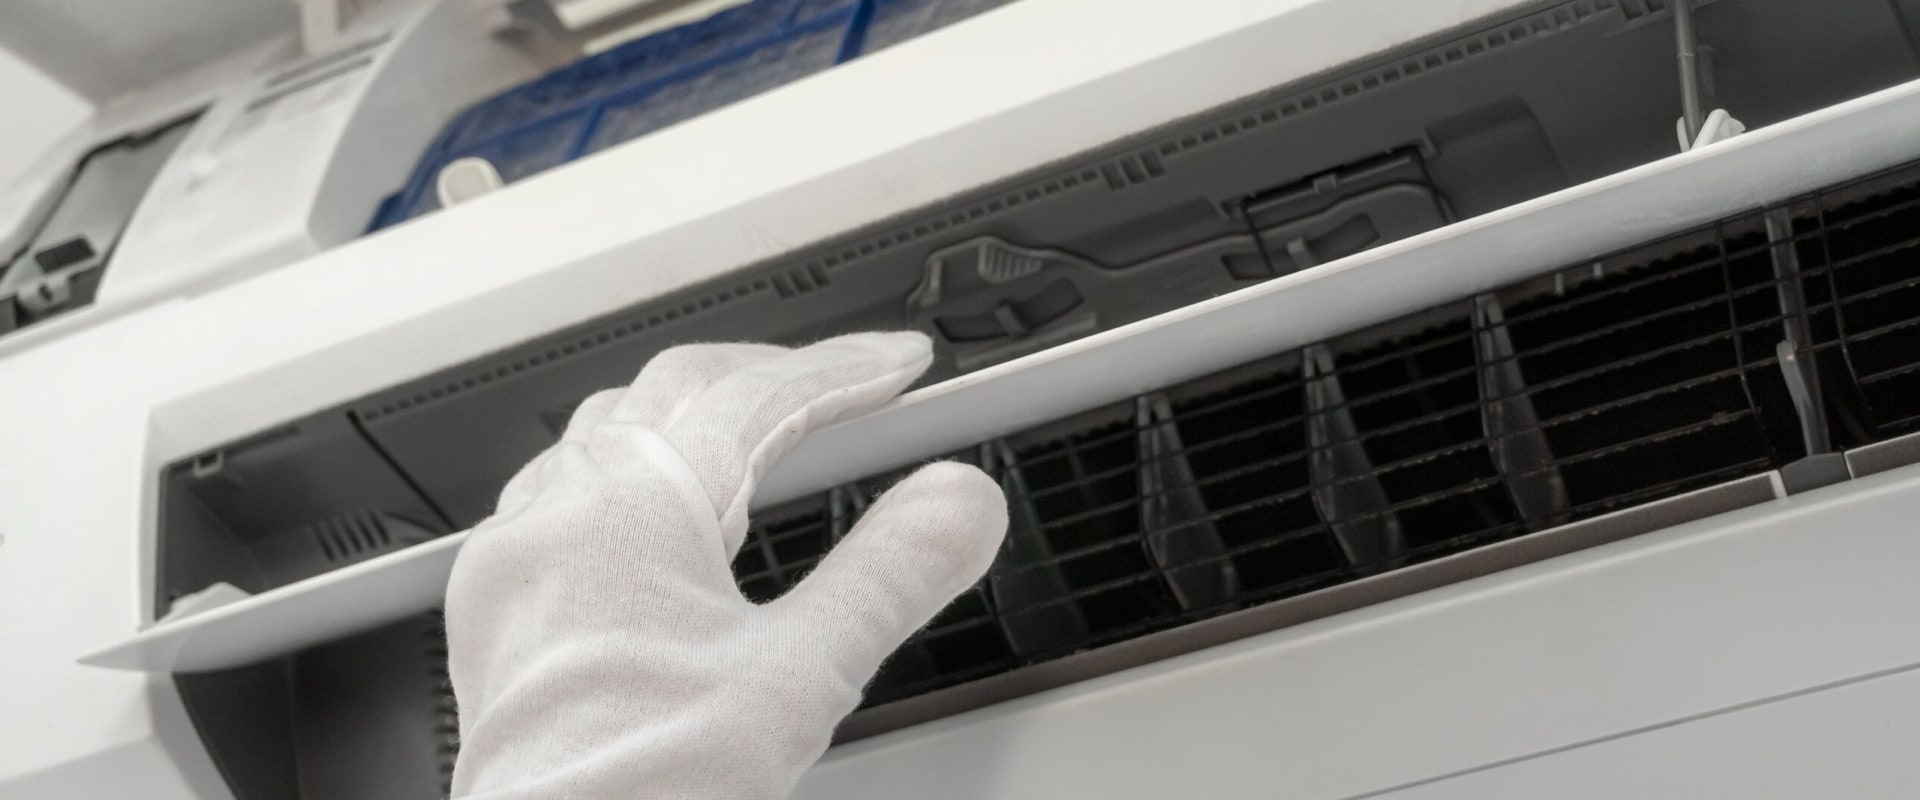 Safety Measures to Ensure When Maintaining and Repairing an Air Conditioner